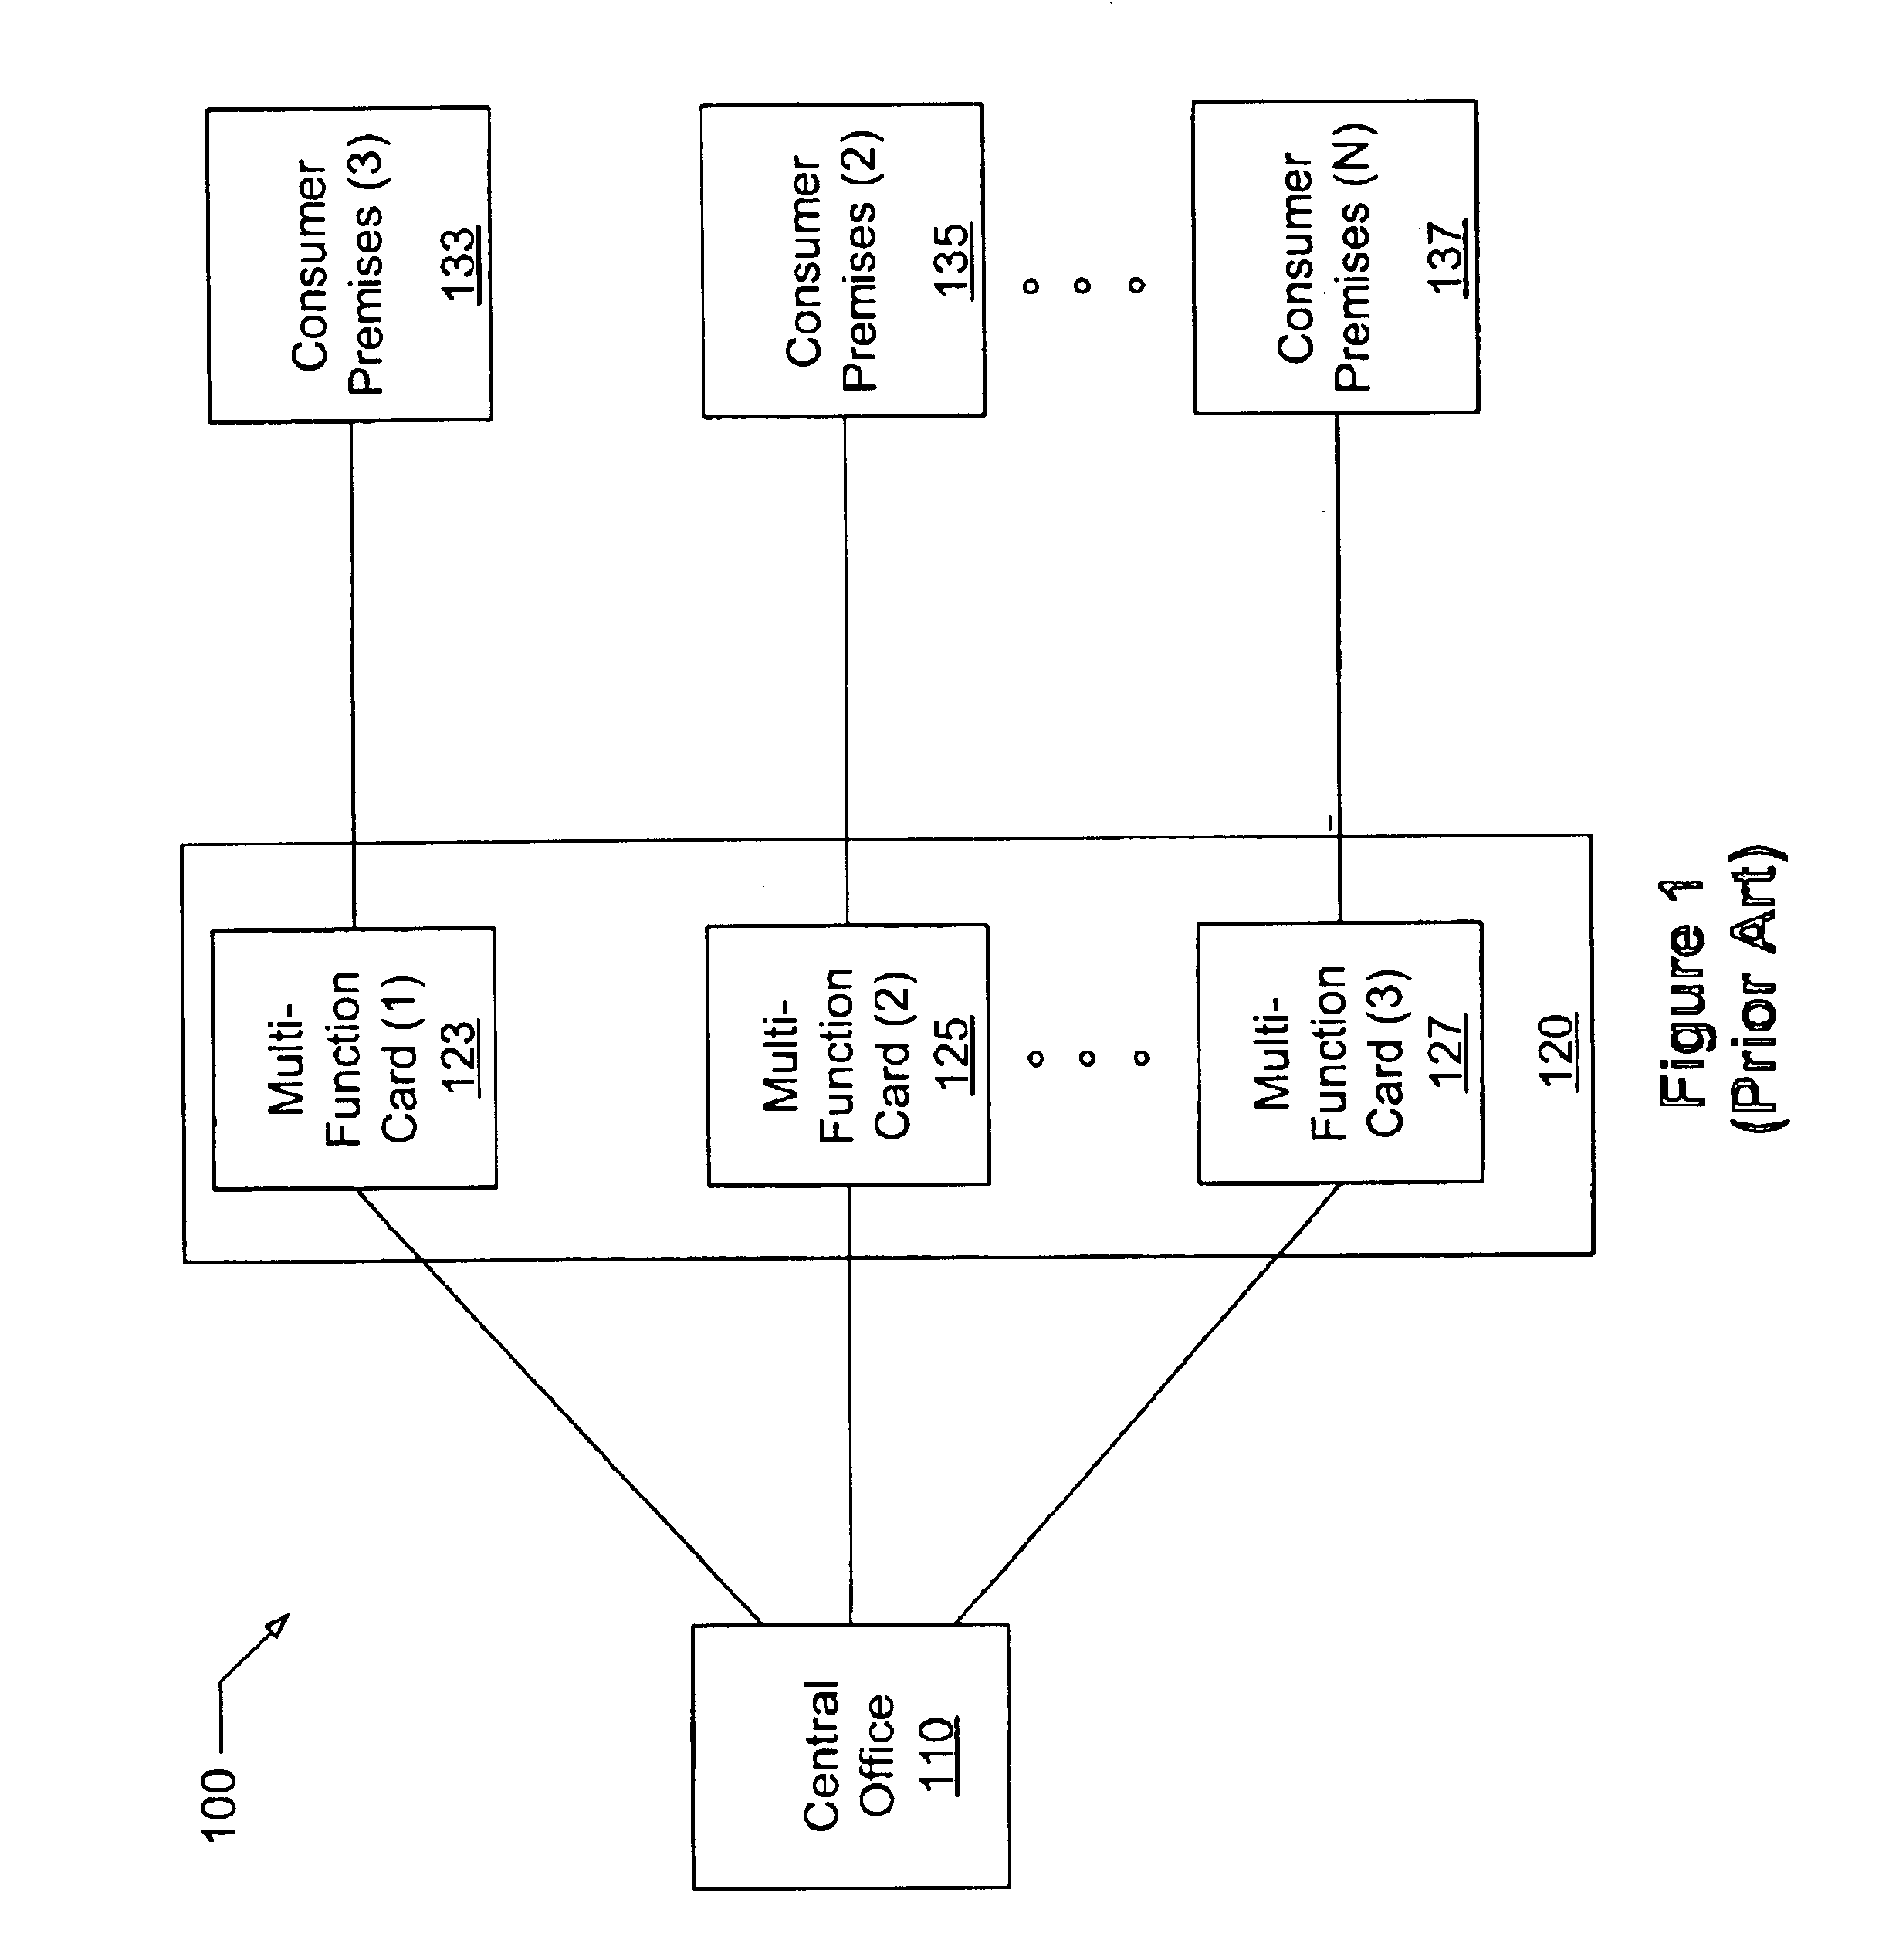 Systems and methods for providing pooled access in a telecommunications network